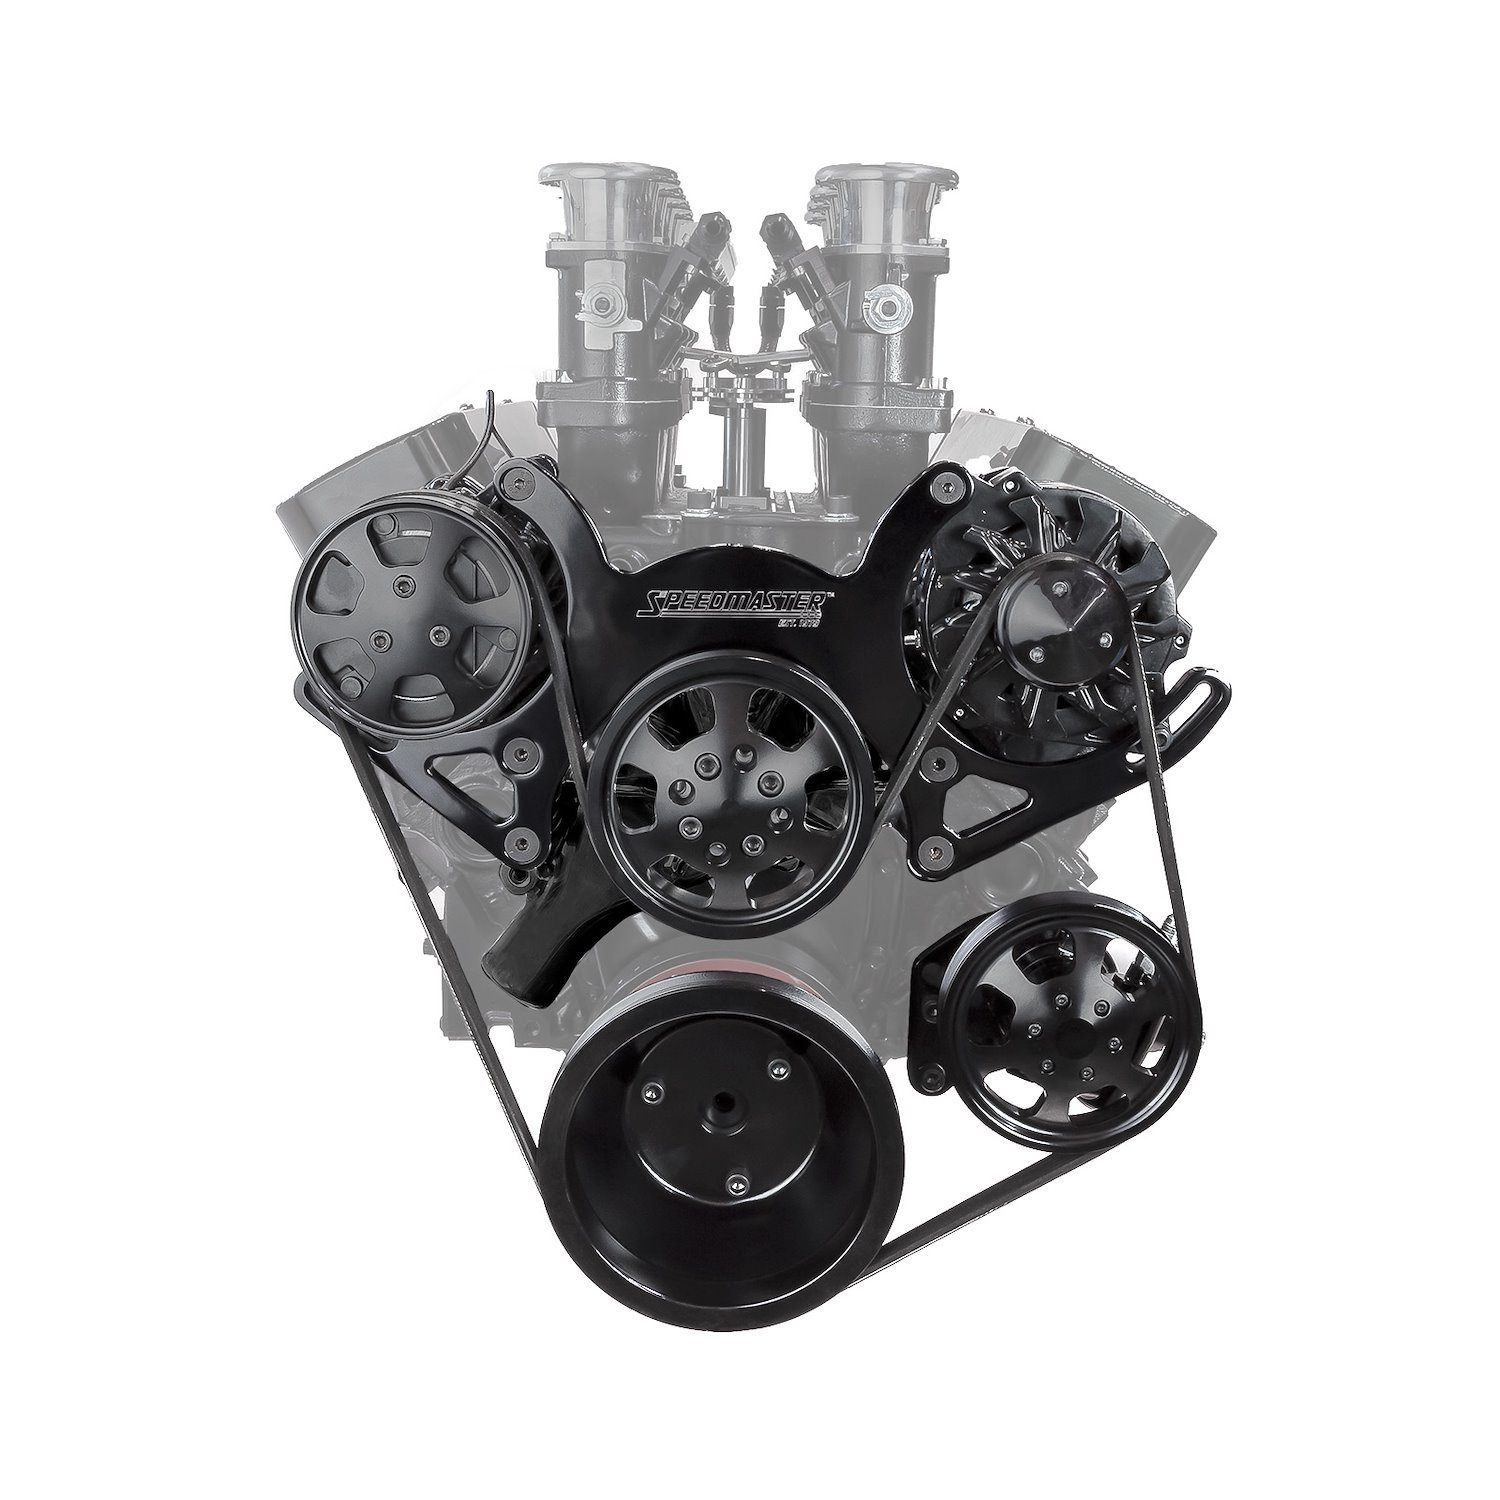 Complete Engine Drive Accessory Kit for Small Block Chevy 350 - Anodized Black